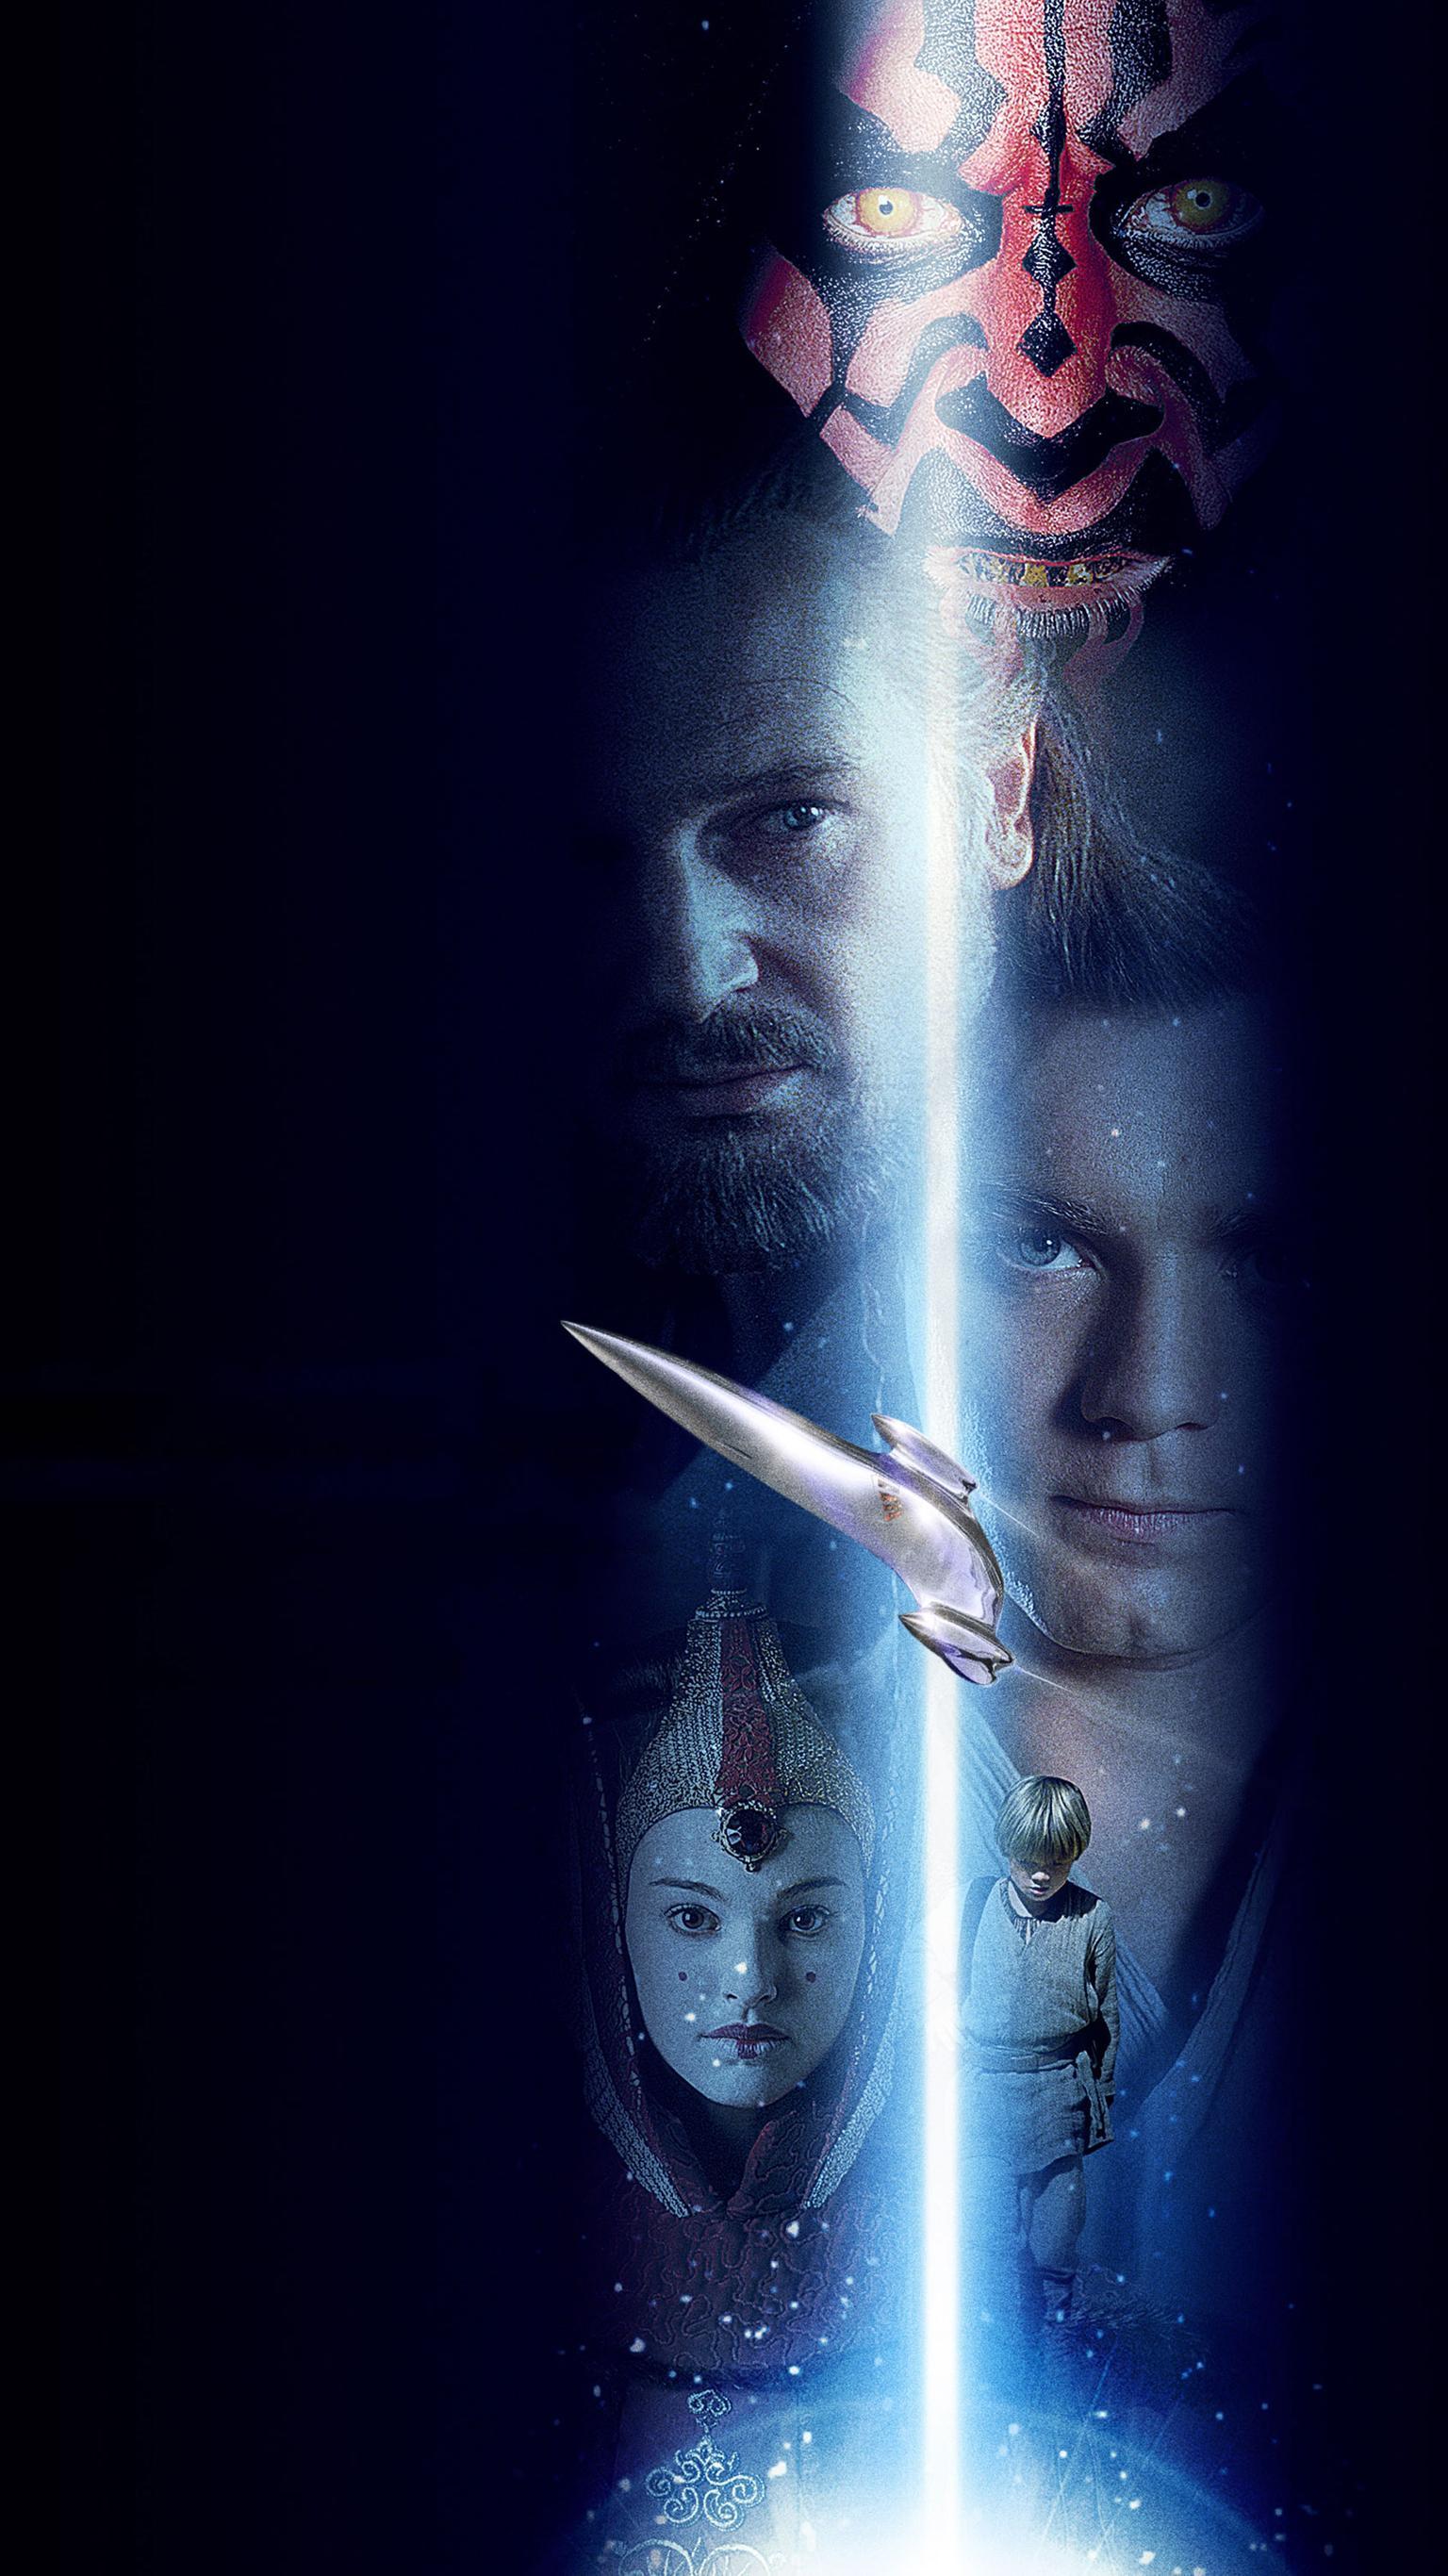 Star Wars Ep. I: The Phantom Menace download the new for ios